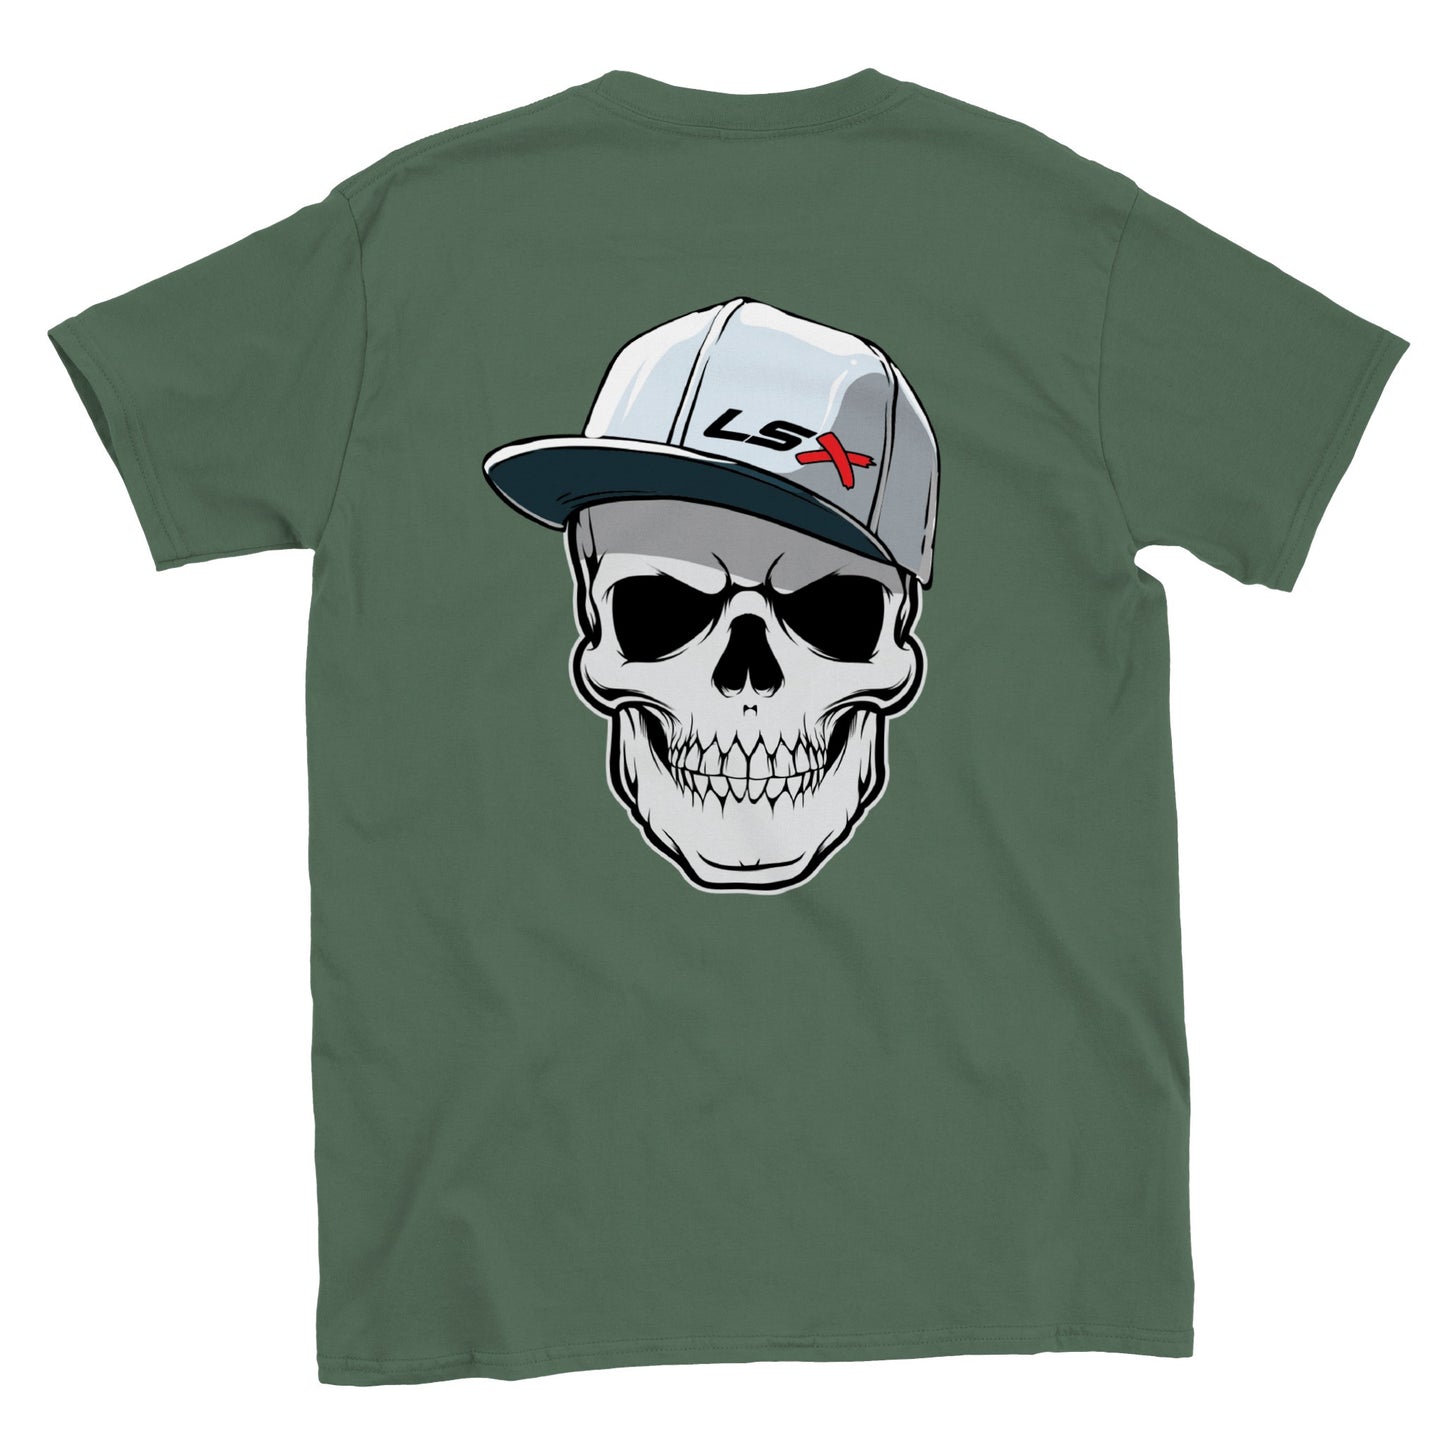 LSX Chevy Skull with Hat - Classic Unisex Crewneck T-shirt - Mister Snarky's